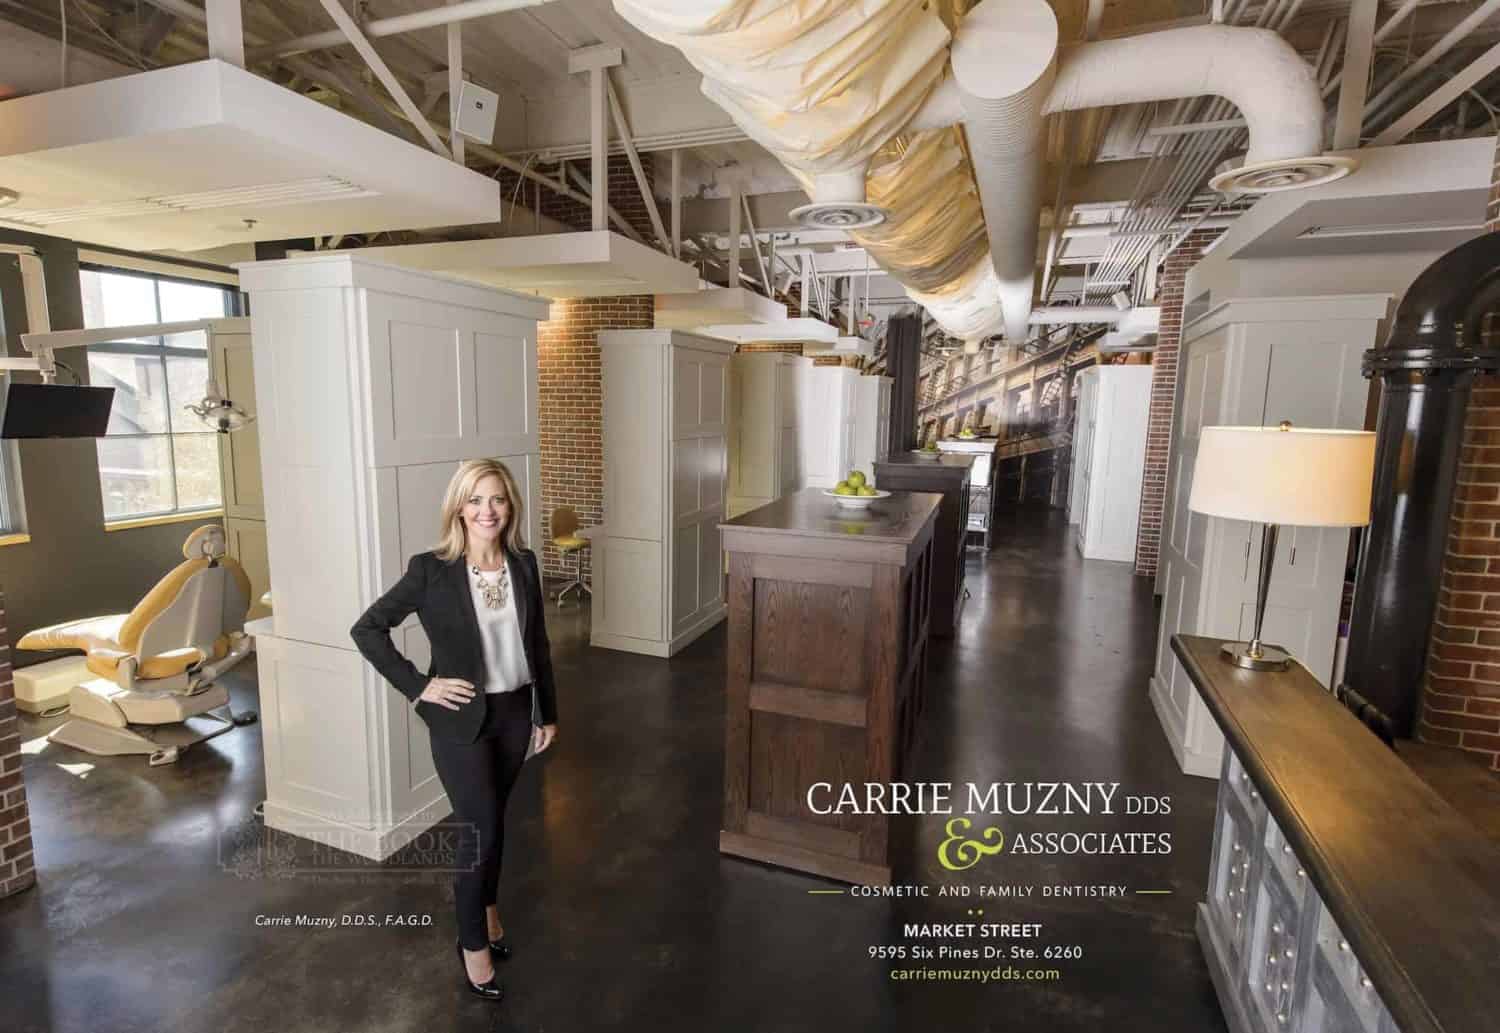 Carrie Muzny Dentist cover